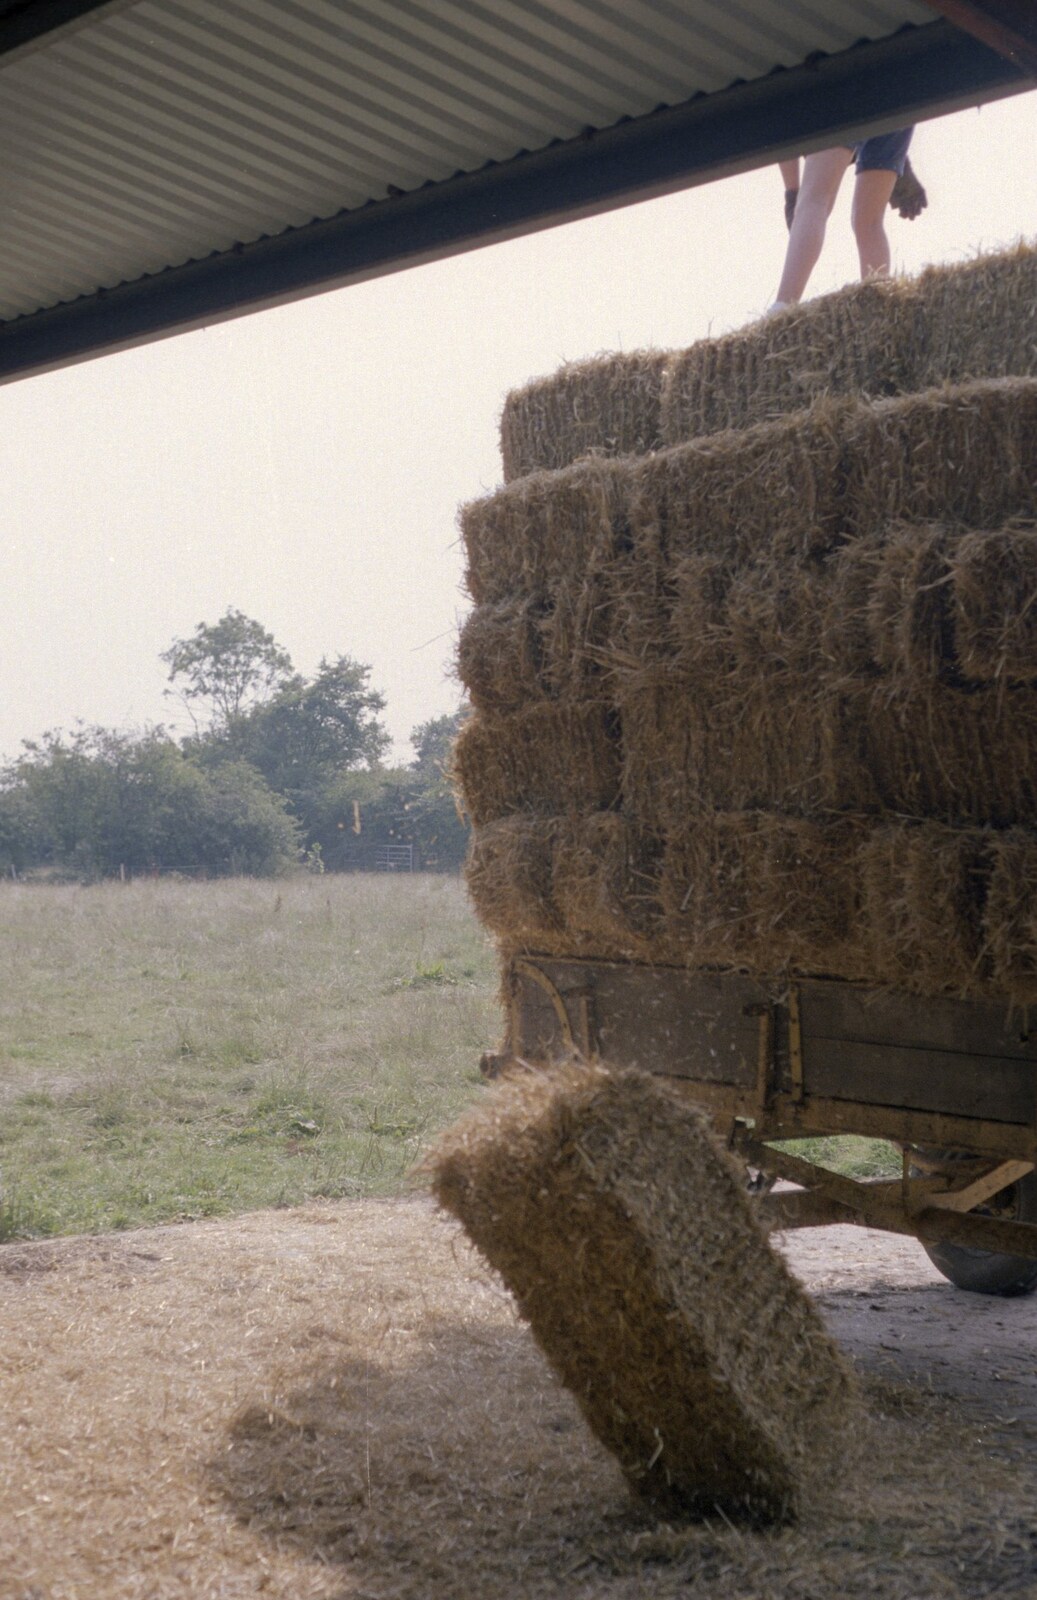 Working on the Harvest, Tibenham, Norfolk - 11th August 1992: The first bale is chucked down from the trailer